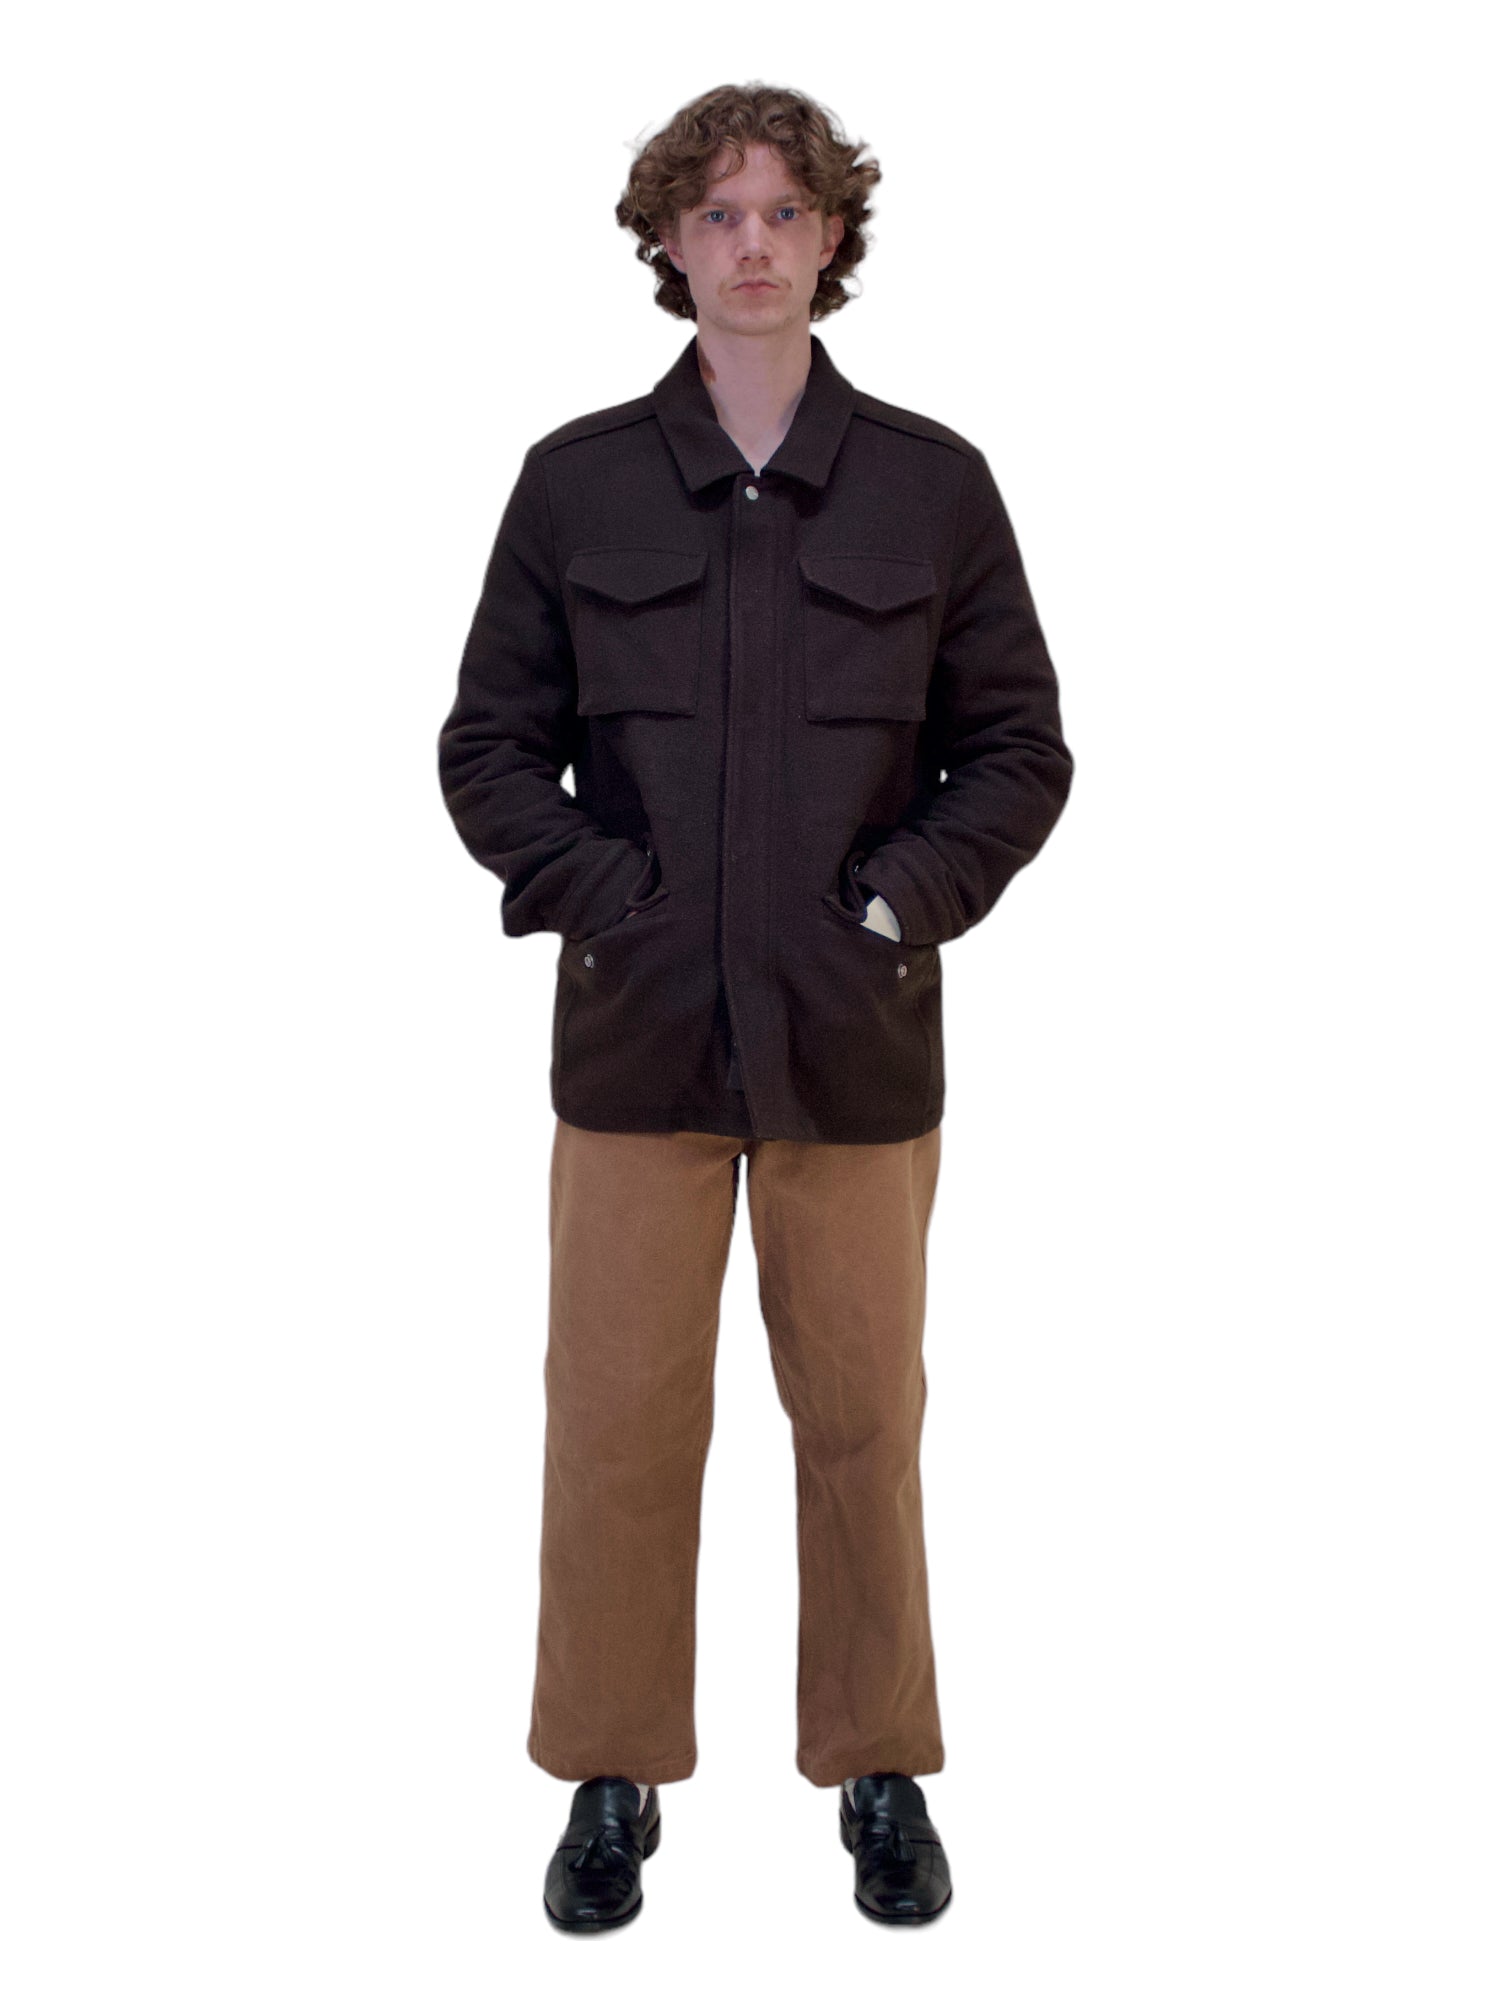 All Saints Brown Kadleston Wool-Blend Coat - Genuine Design Luxury Consignment for Men. New & Pre-Owned Clothing, Shoes, & Accessories. Calgary, Canada